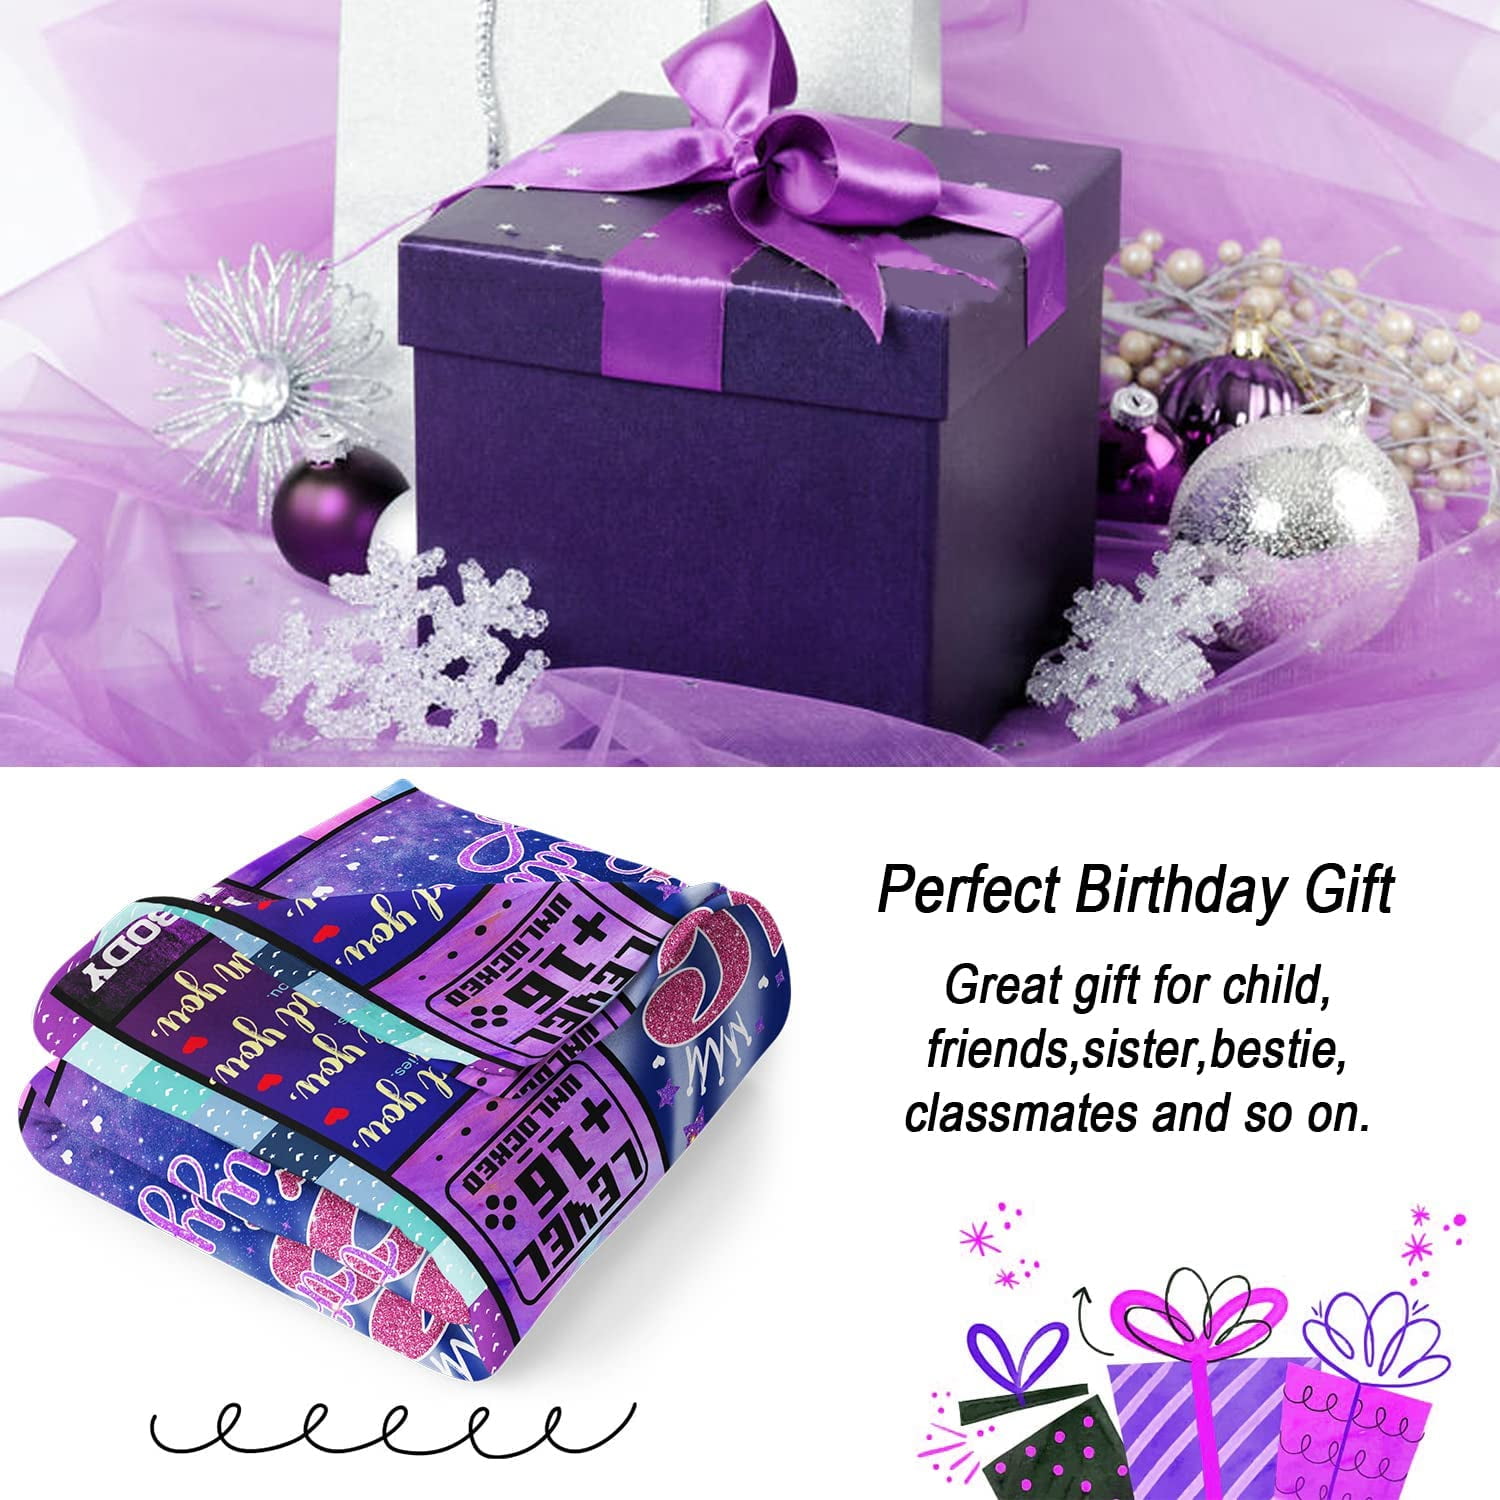  Ekpvgit Gifts for 10 Year Old Girl, 10th Girl Birthday Gifts  Blankets, 10 Year Old Birthday Decorations for Girls, 10 Year Old Girl Gift  Ideas, Best Gifts for 10 Year Old